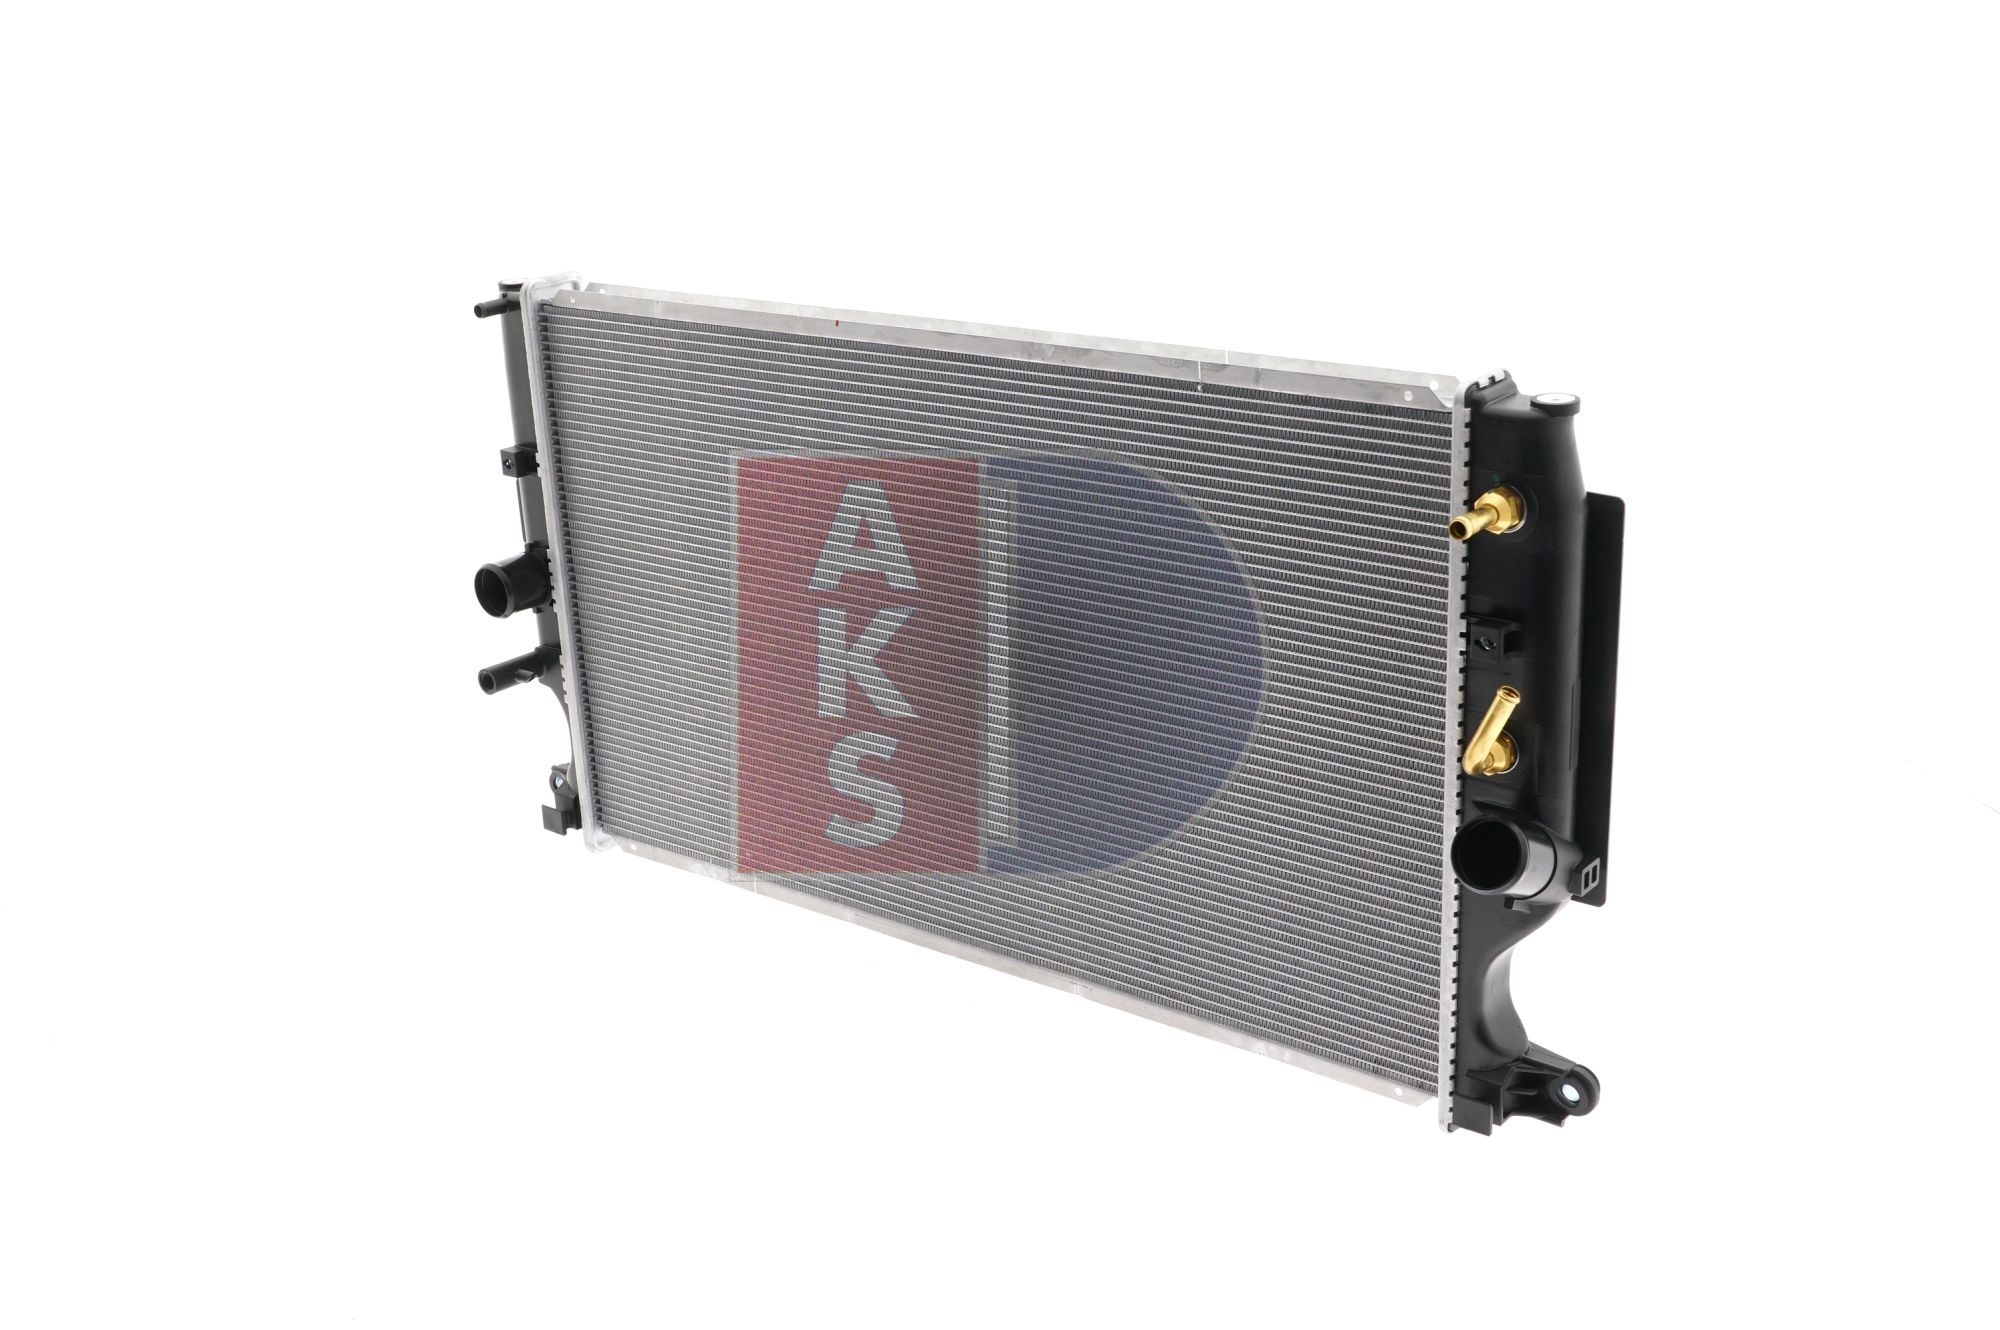 AKS DASIS 210264N Engine radiator Aluminium, for vehicles with/without air conditioning, 665 x 378 x 27 mm, Automatic Transmission, Brazed cooling fins